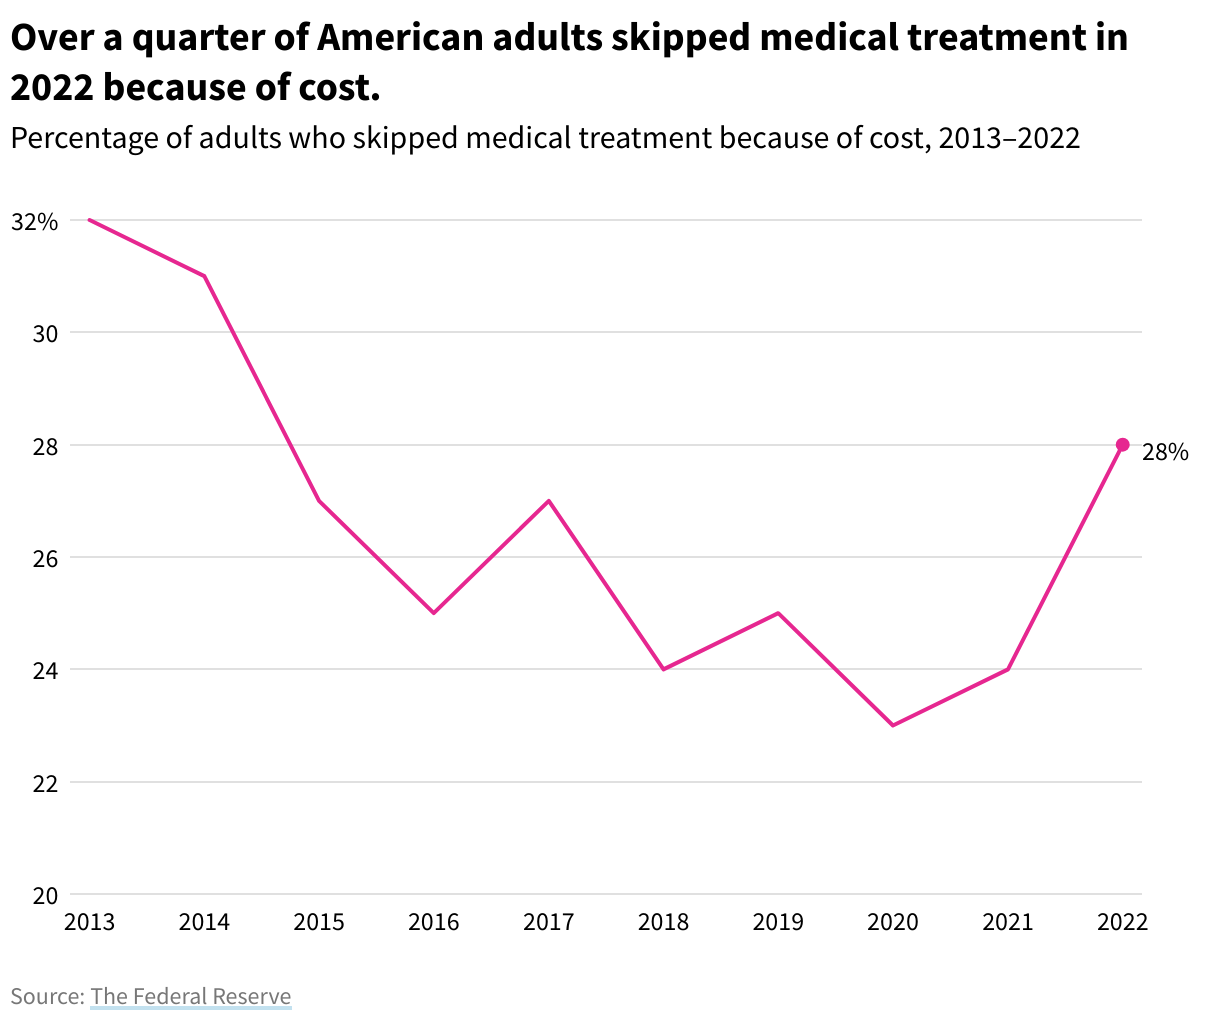 Line chart showing percentage of people who skipped medical treatment because of cost, by year. Over a quarter of Americans skipped medical treatment in 2022.